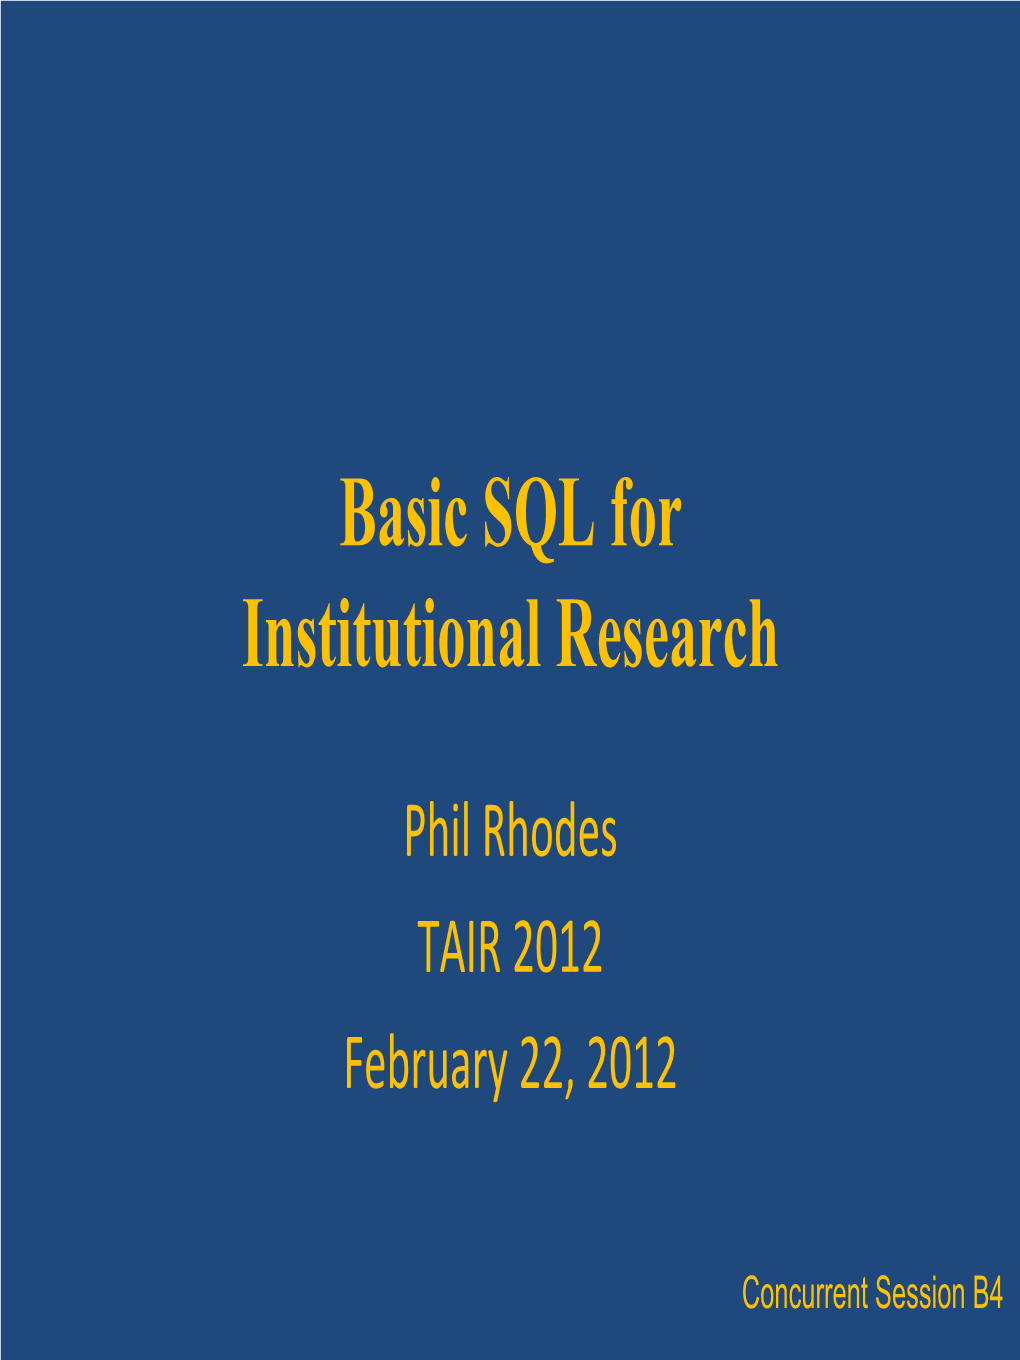 Basic SQL for Institutional Research